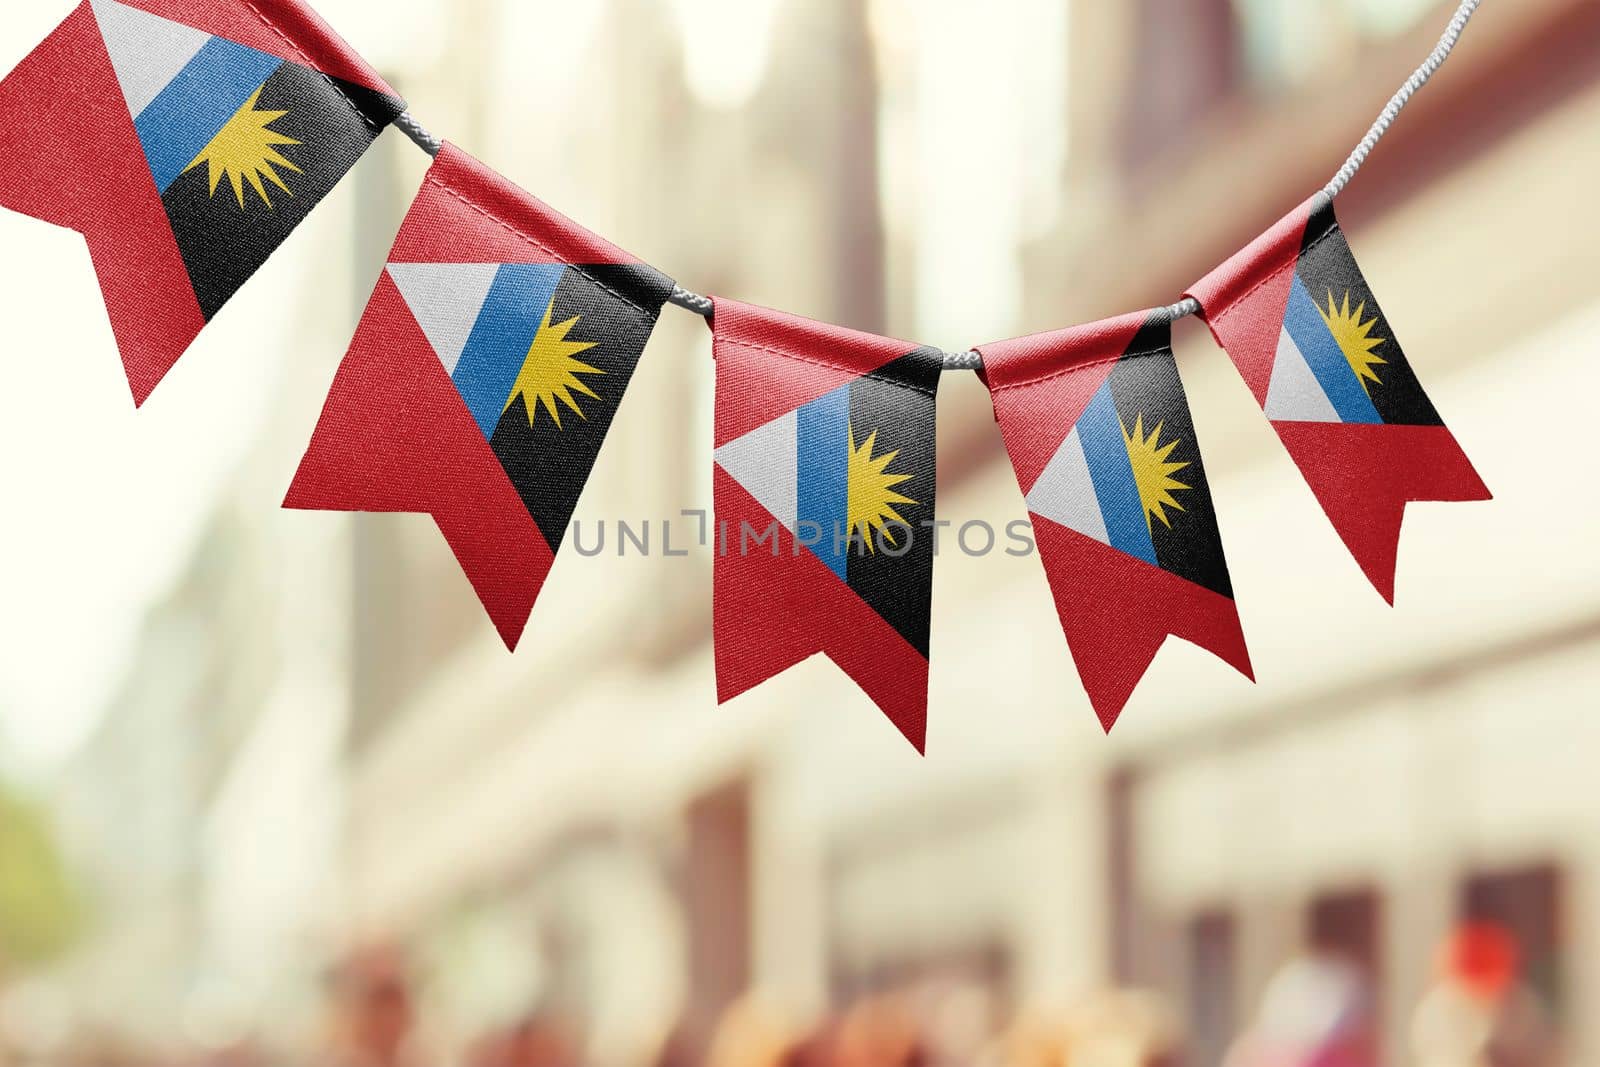 A garland of Antigua and Barbuda national flags on an abstract blurred background.